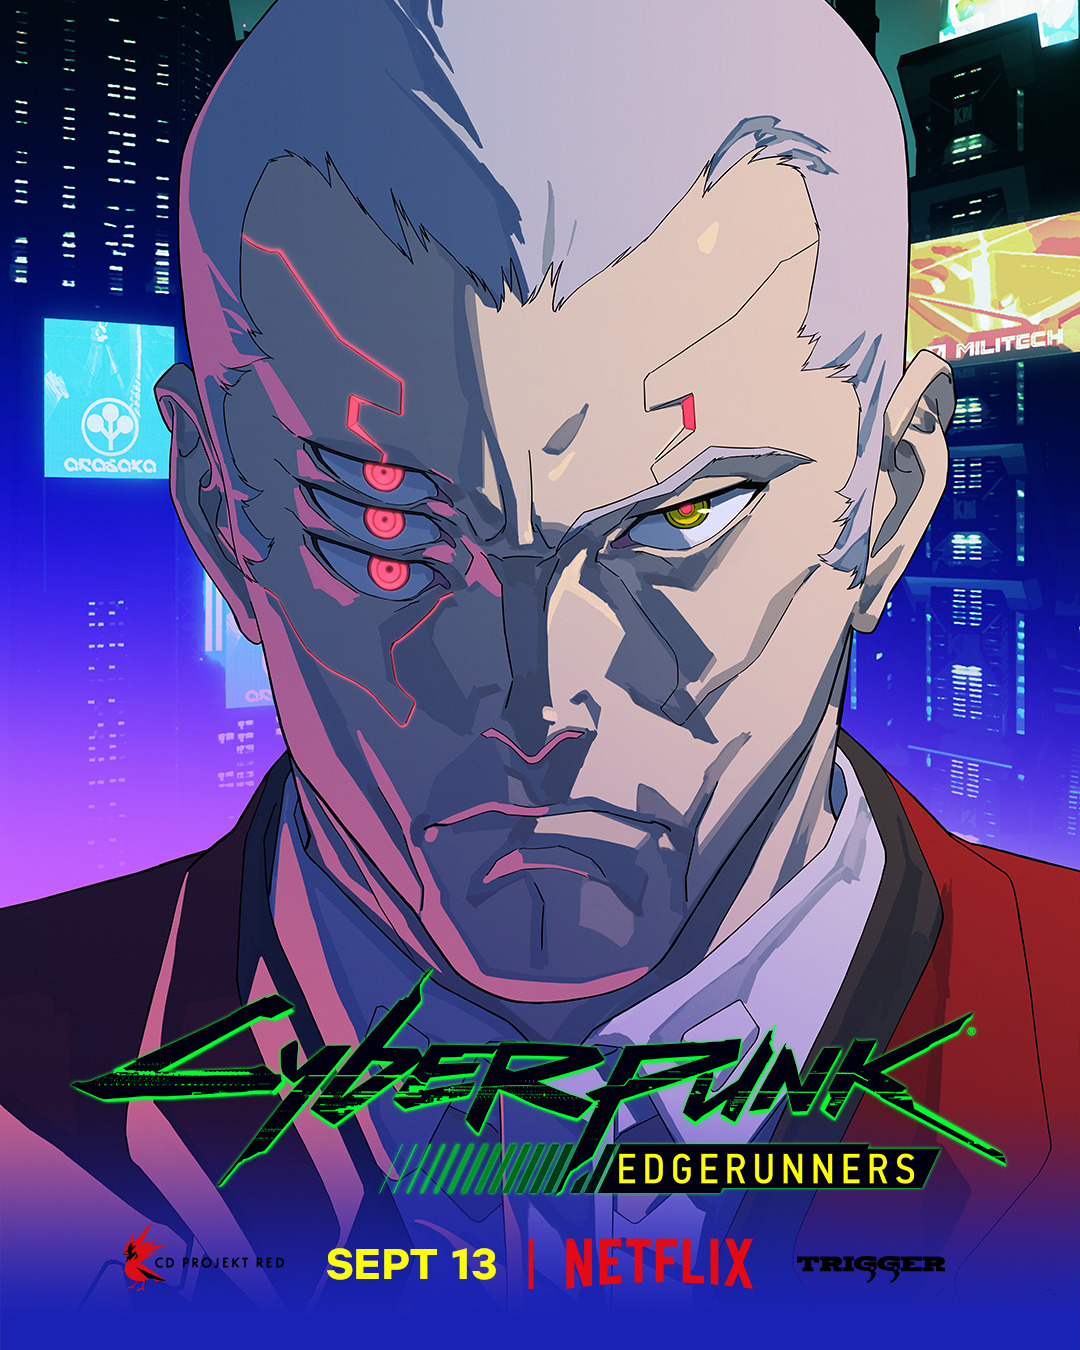 Extra Large TV Poster Image for Cyberpunk: Edgerunners (#6 of 6)